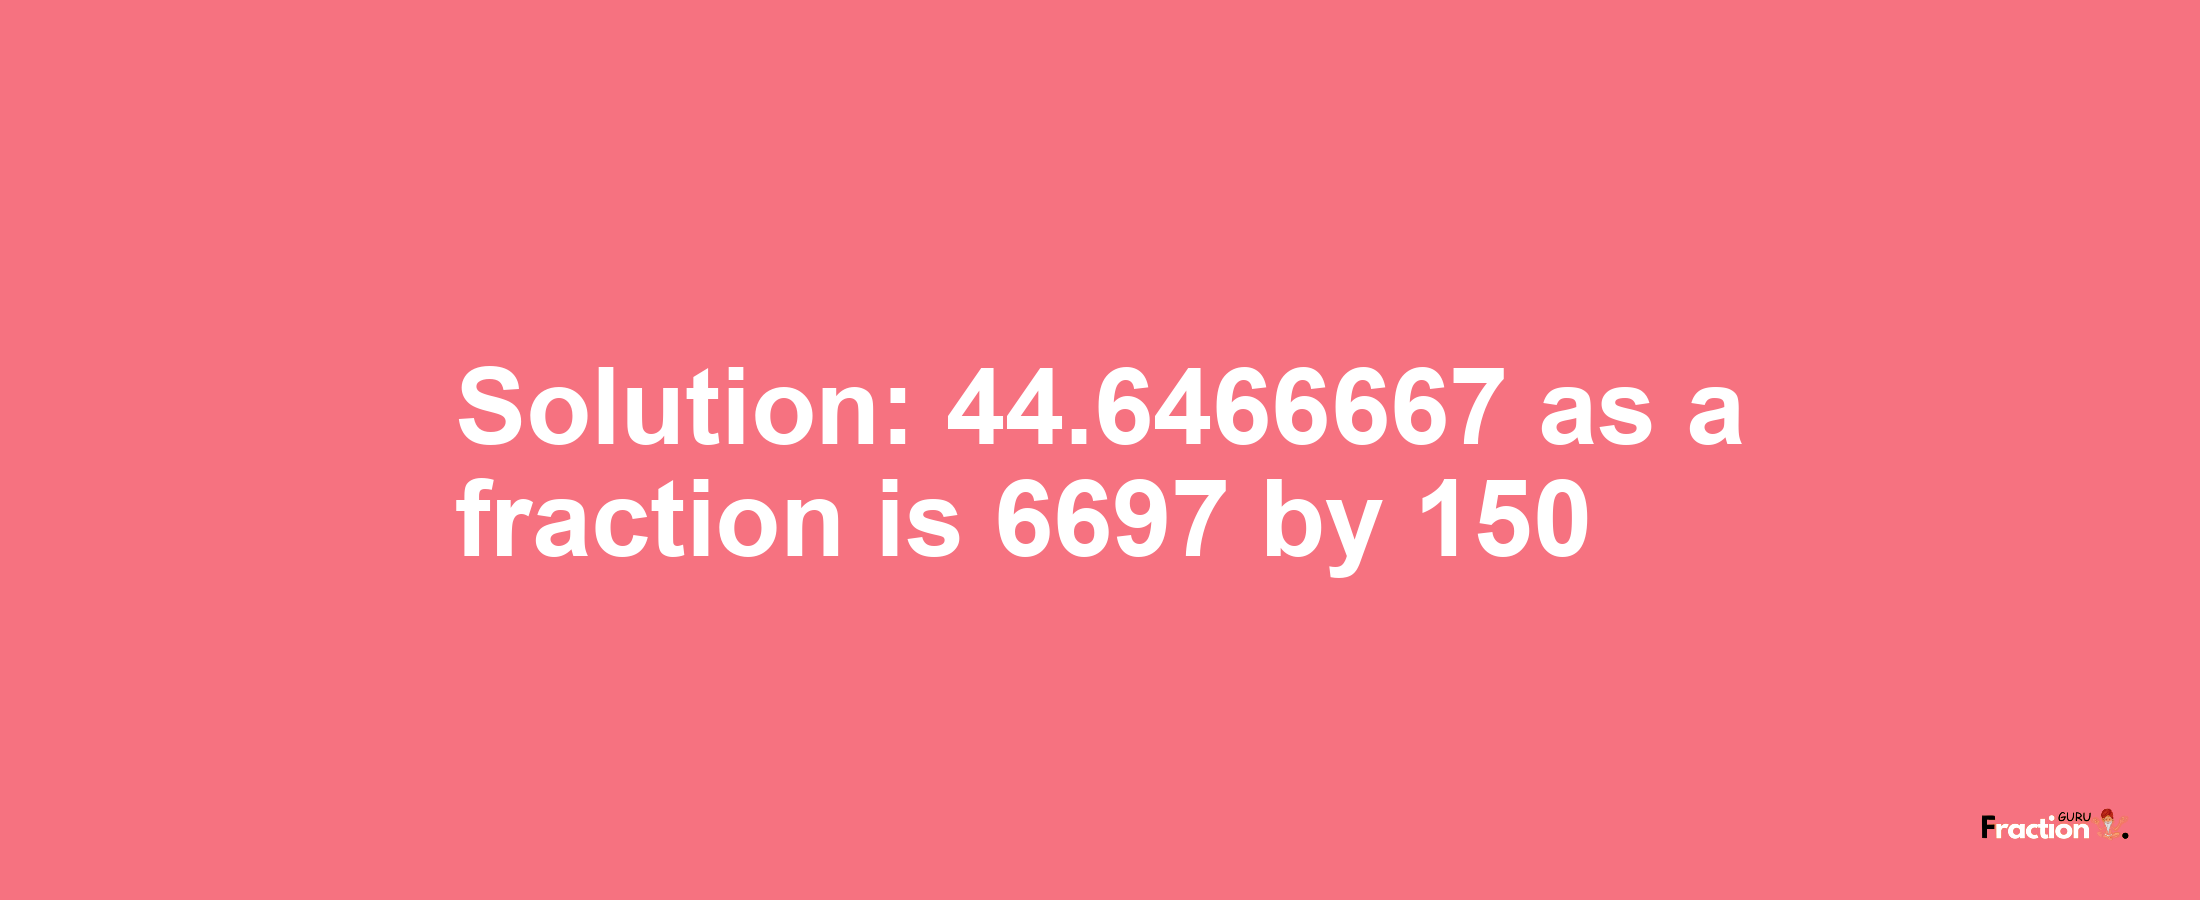 Solution:44.6466667 as a fraction is 6697/150